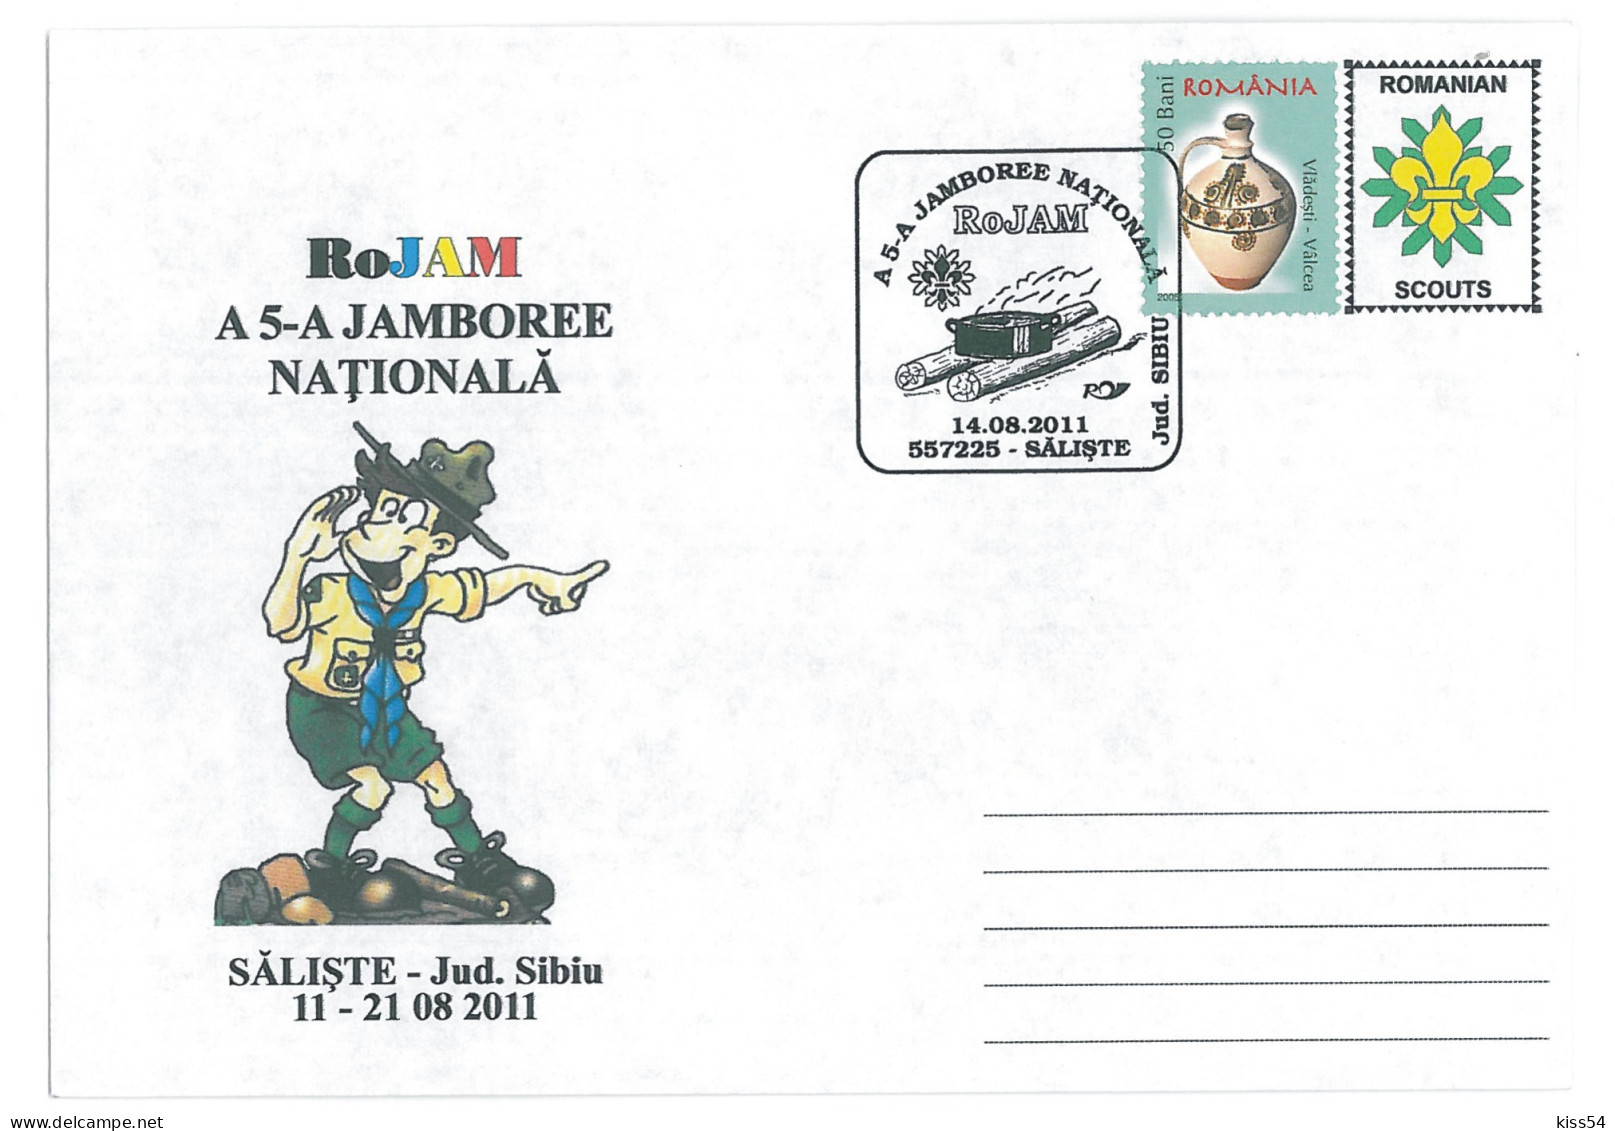 SC 06 - 1296 SCOUT, National Jamboree Romania - Cover - Used - 2011 - Covers & Documents